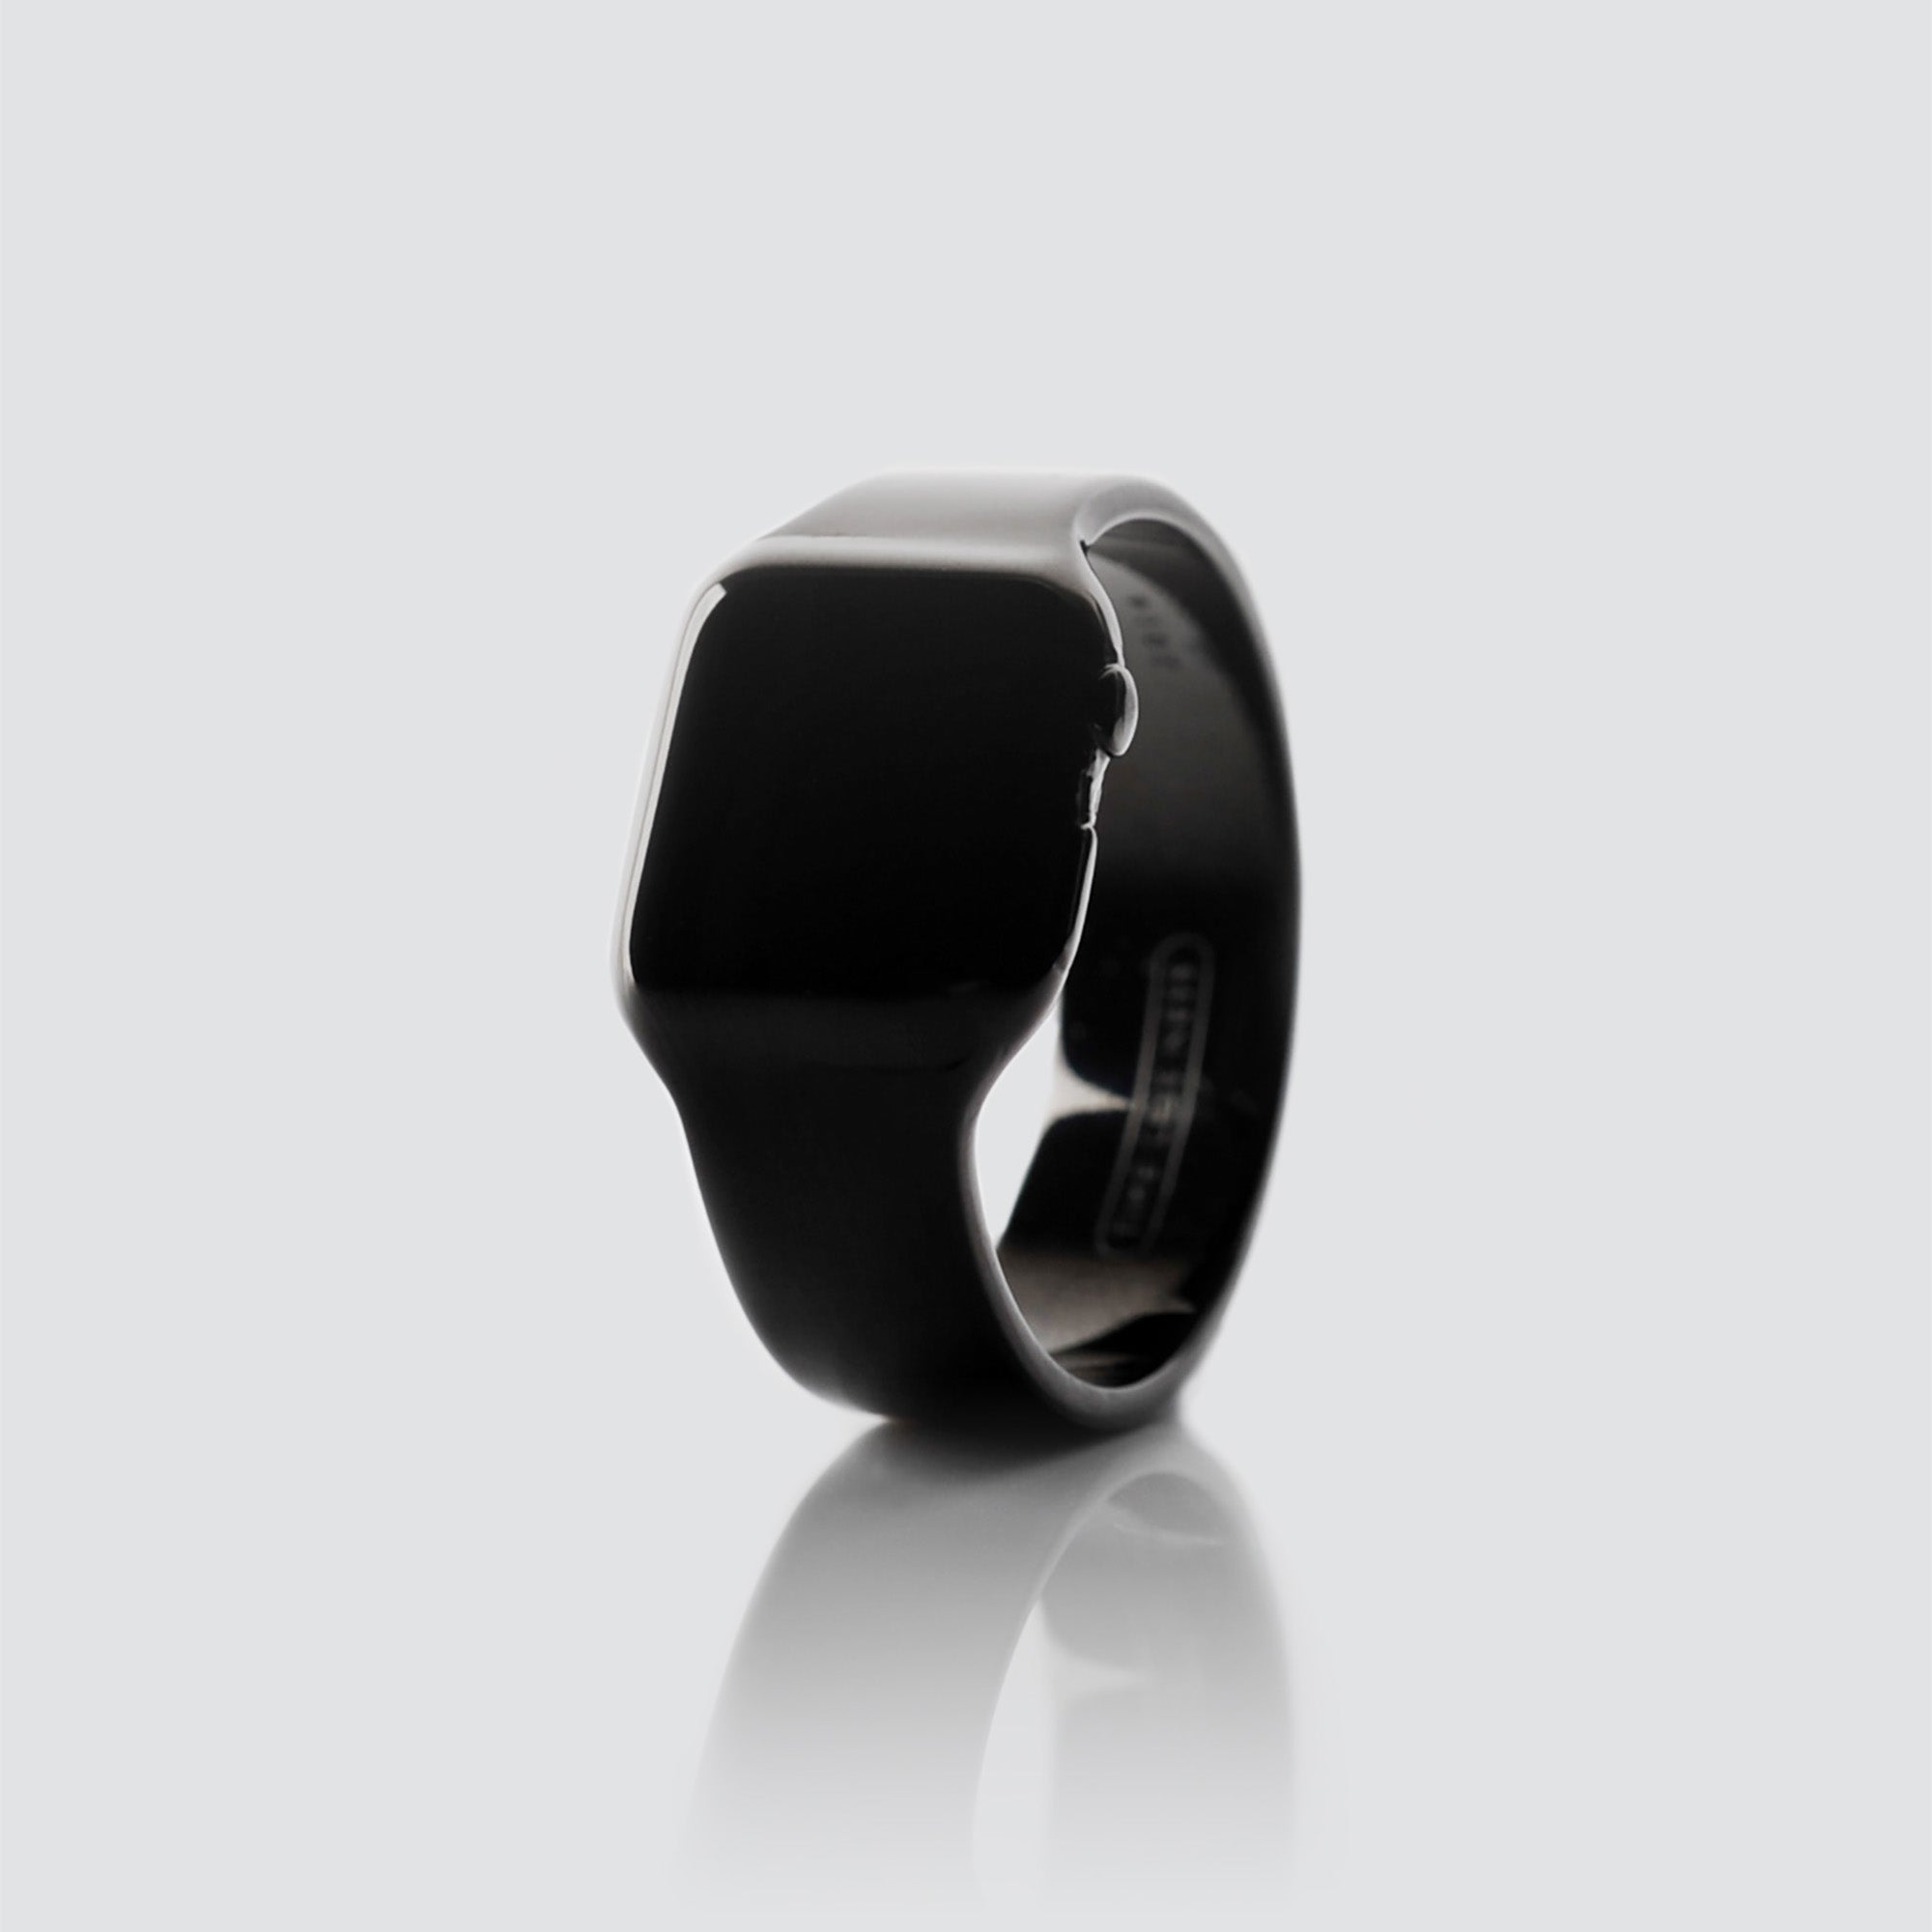 TIME:LESS:NESS - 2014 – The smartwatch (Ring - Black)